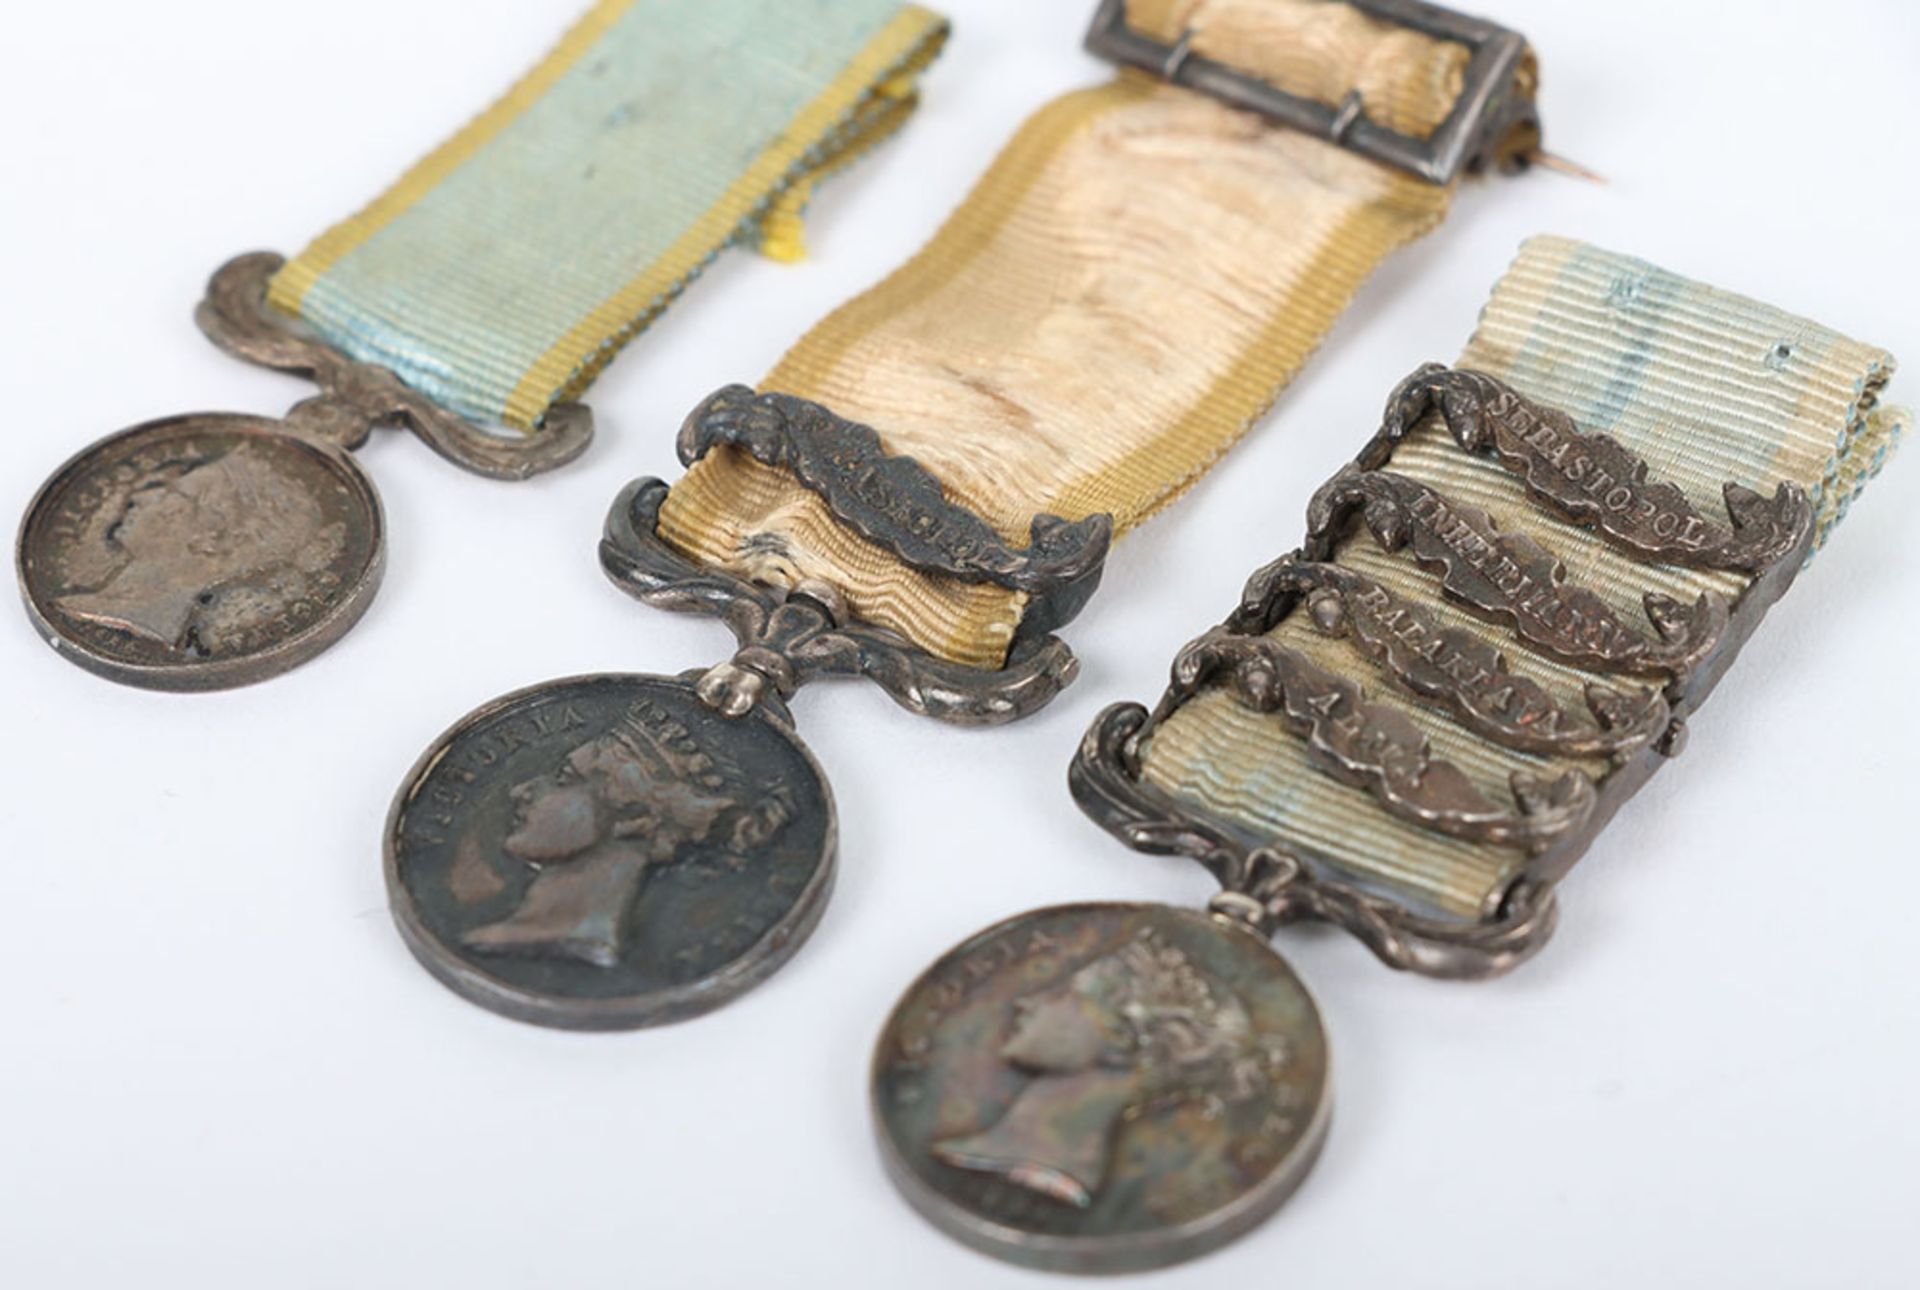 Collection of 5 Contemporary Victorian Miniature Medals for Service in the Crimea and the Baltic - Image 8 of 9